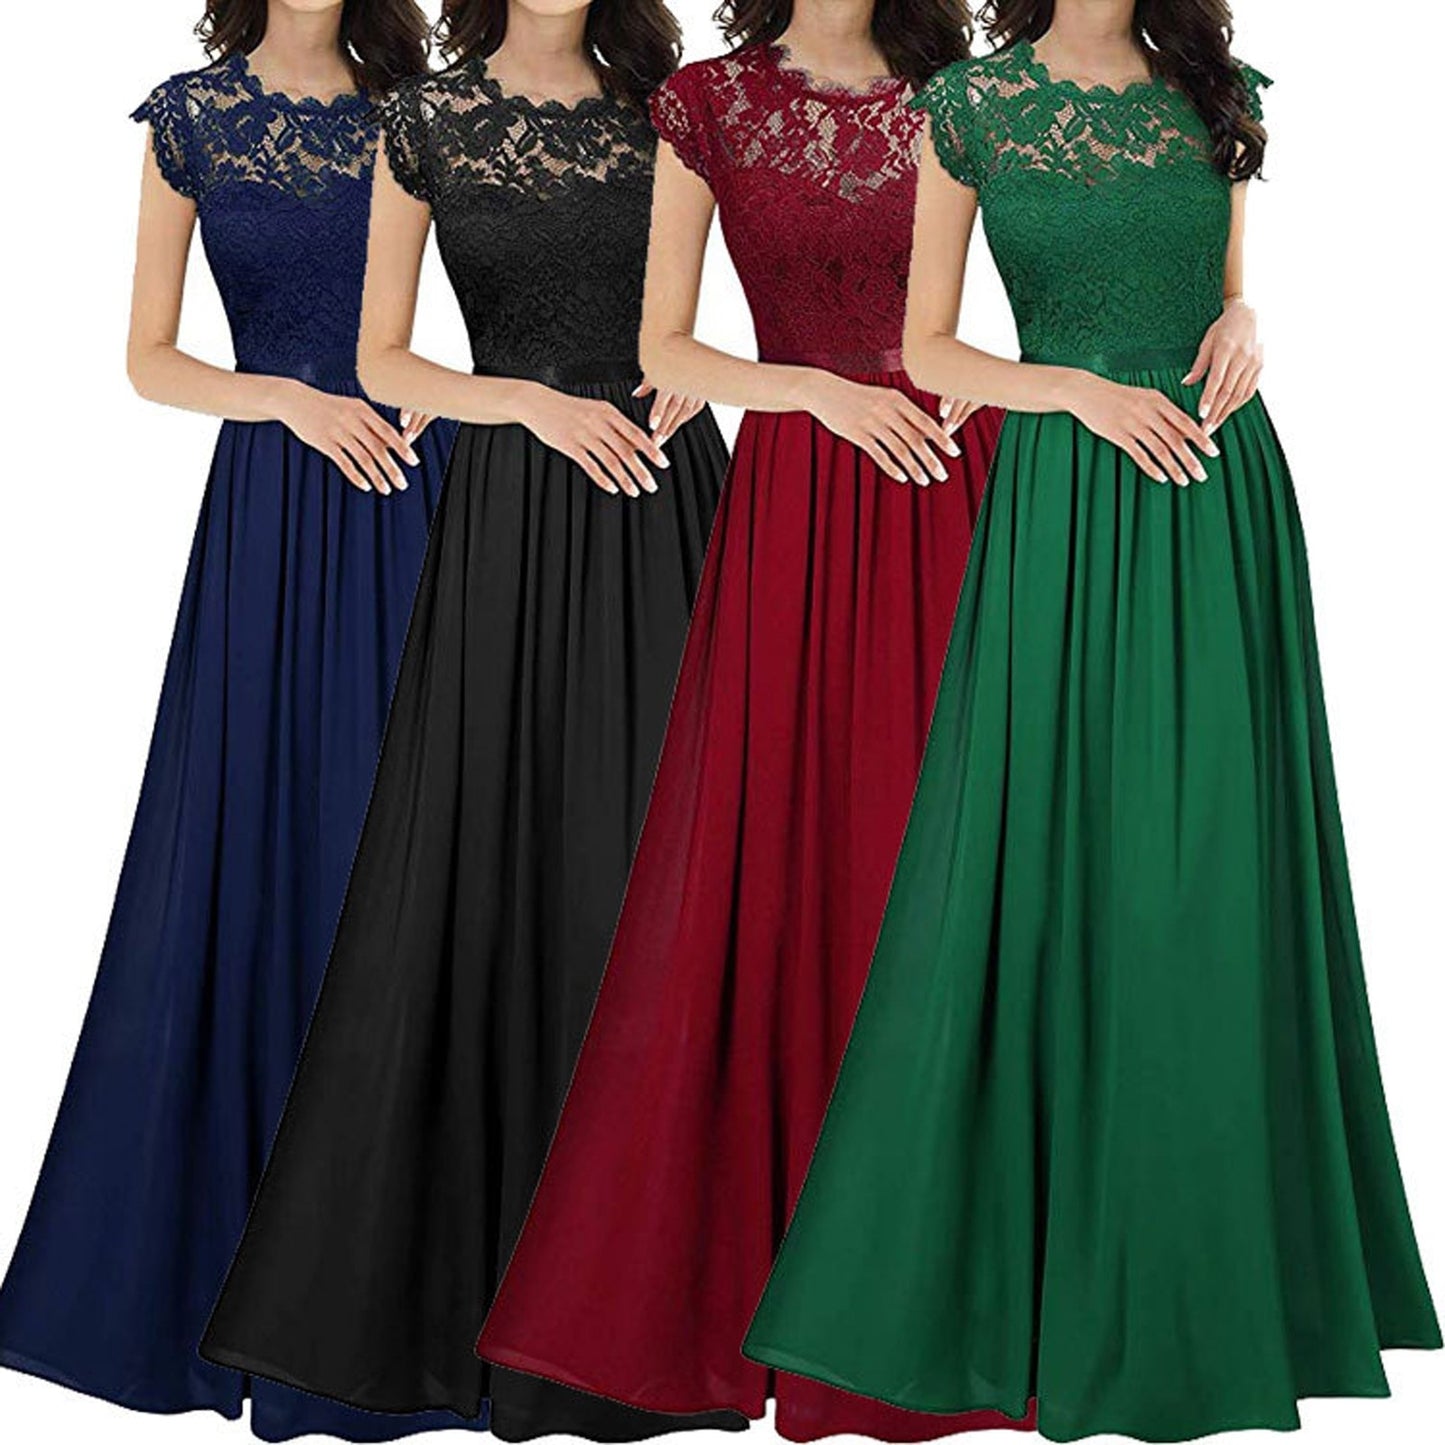 Floral Lace  Patchwork Maxi Dress Ladies Stitching Bridesmaids Weeding Party Dress Ladies Fashion Sleeveless Pleated Dress Gowns